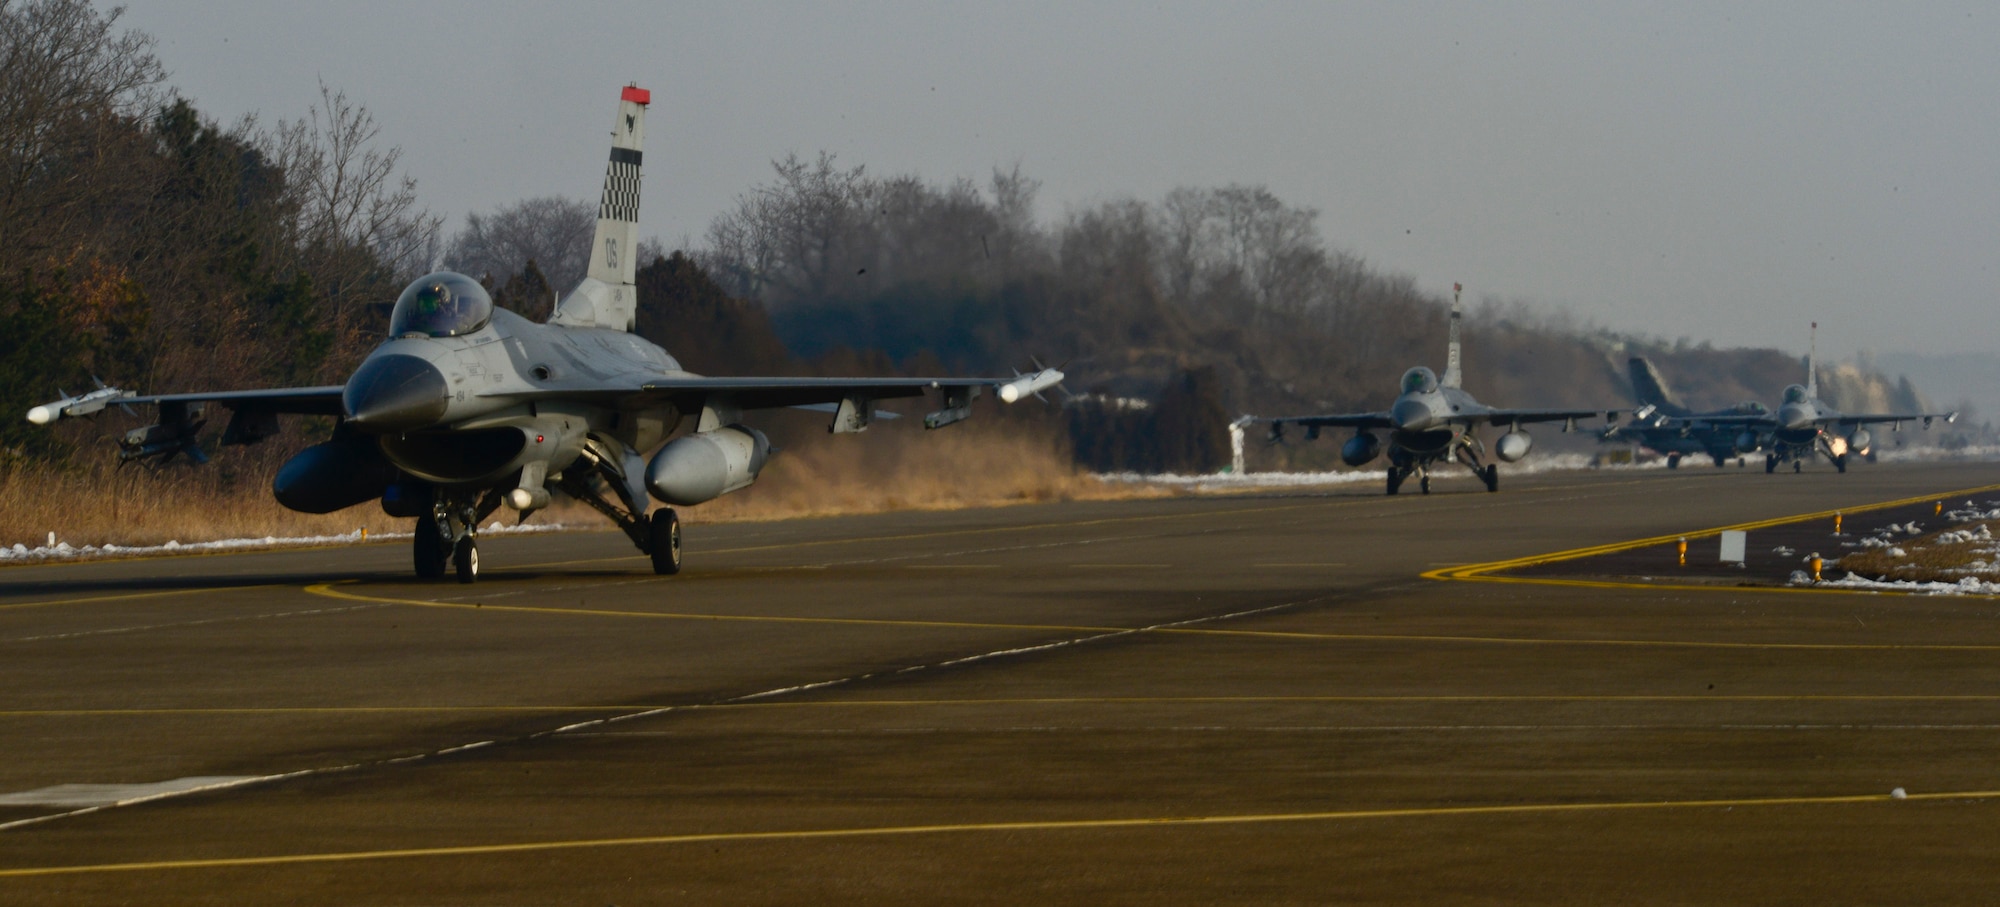 Pilots from the 36th Fighter Squadron, U.S. Air Force taxi to the runway prior to takeoff during Buddy Wing 16-1 at Seosan Air Base, ROK, Jan. 27, 2016. The exercise provided an opportunity for the allied forces to train together and to learn how to communicate better in the event of real-world contingencies. (U.S. Air Force photo by Senior Airman Kristin High/Released)